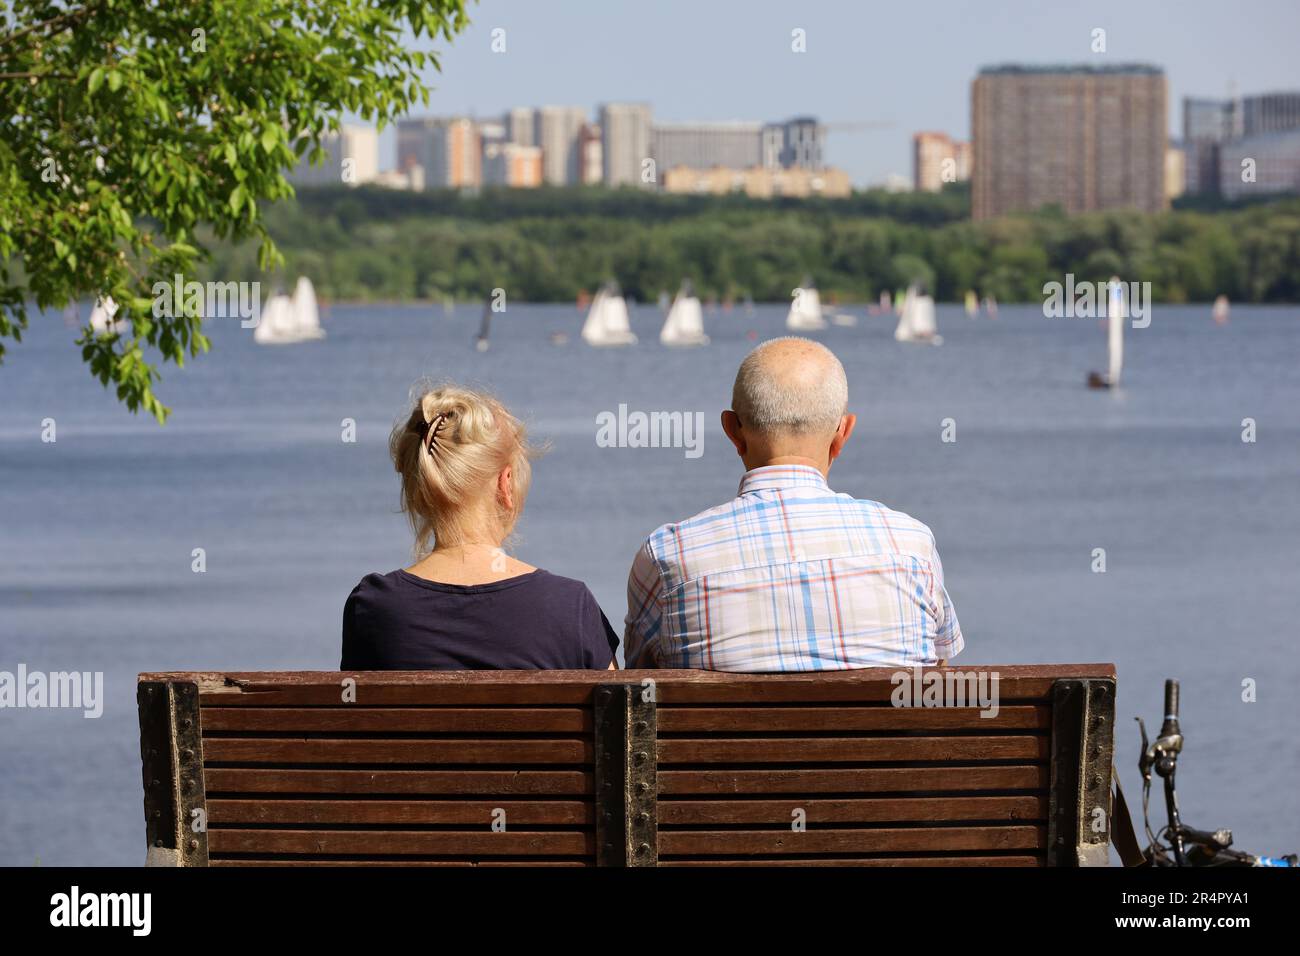 Old woman and man sitting on a wooden bench on river and city background, rear view. Couple of retirees on a beach, relax and enjoying life in summer Stock Photo